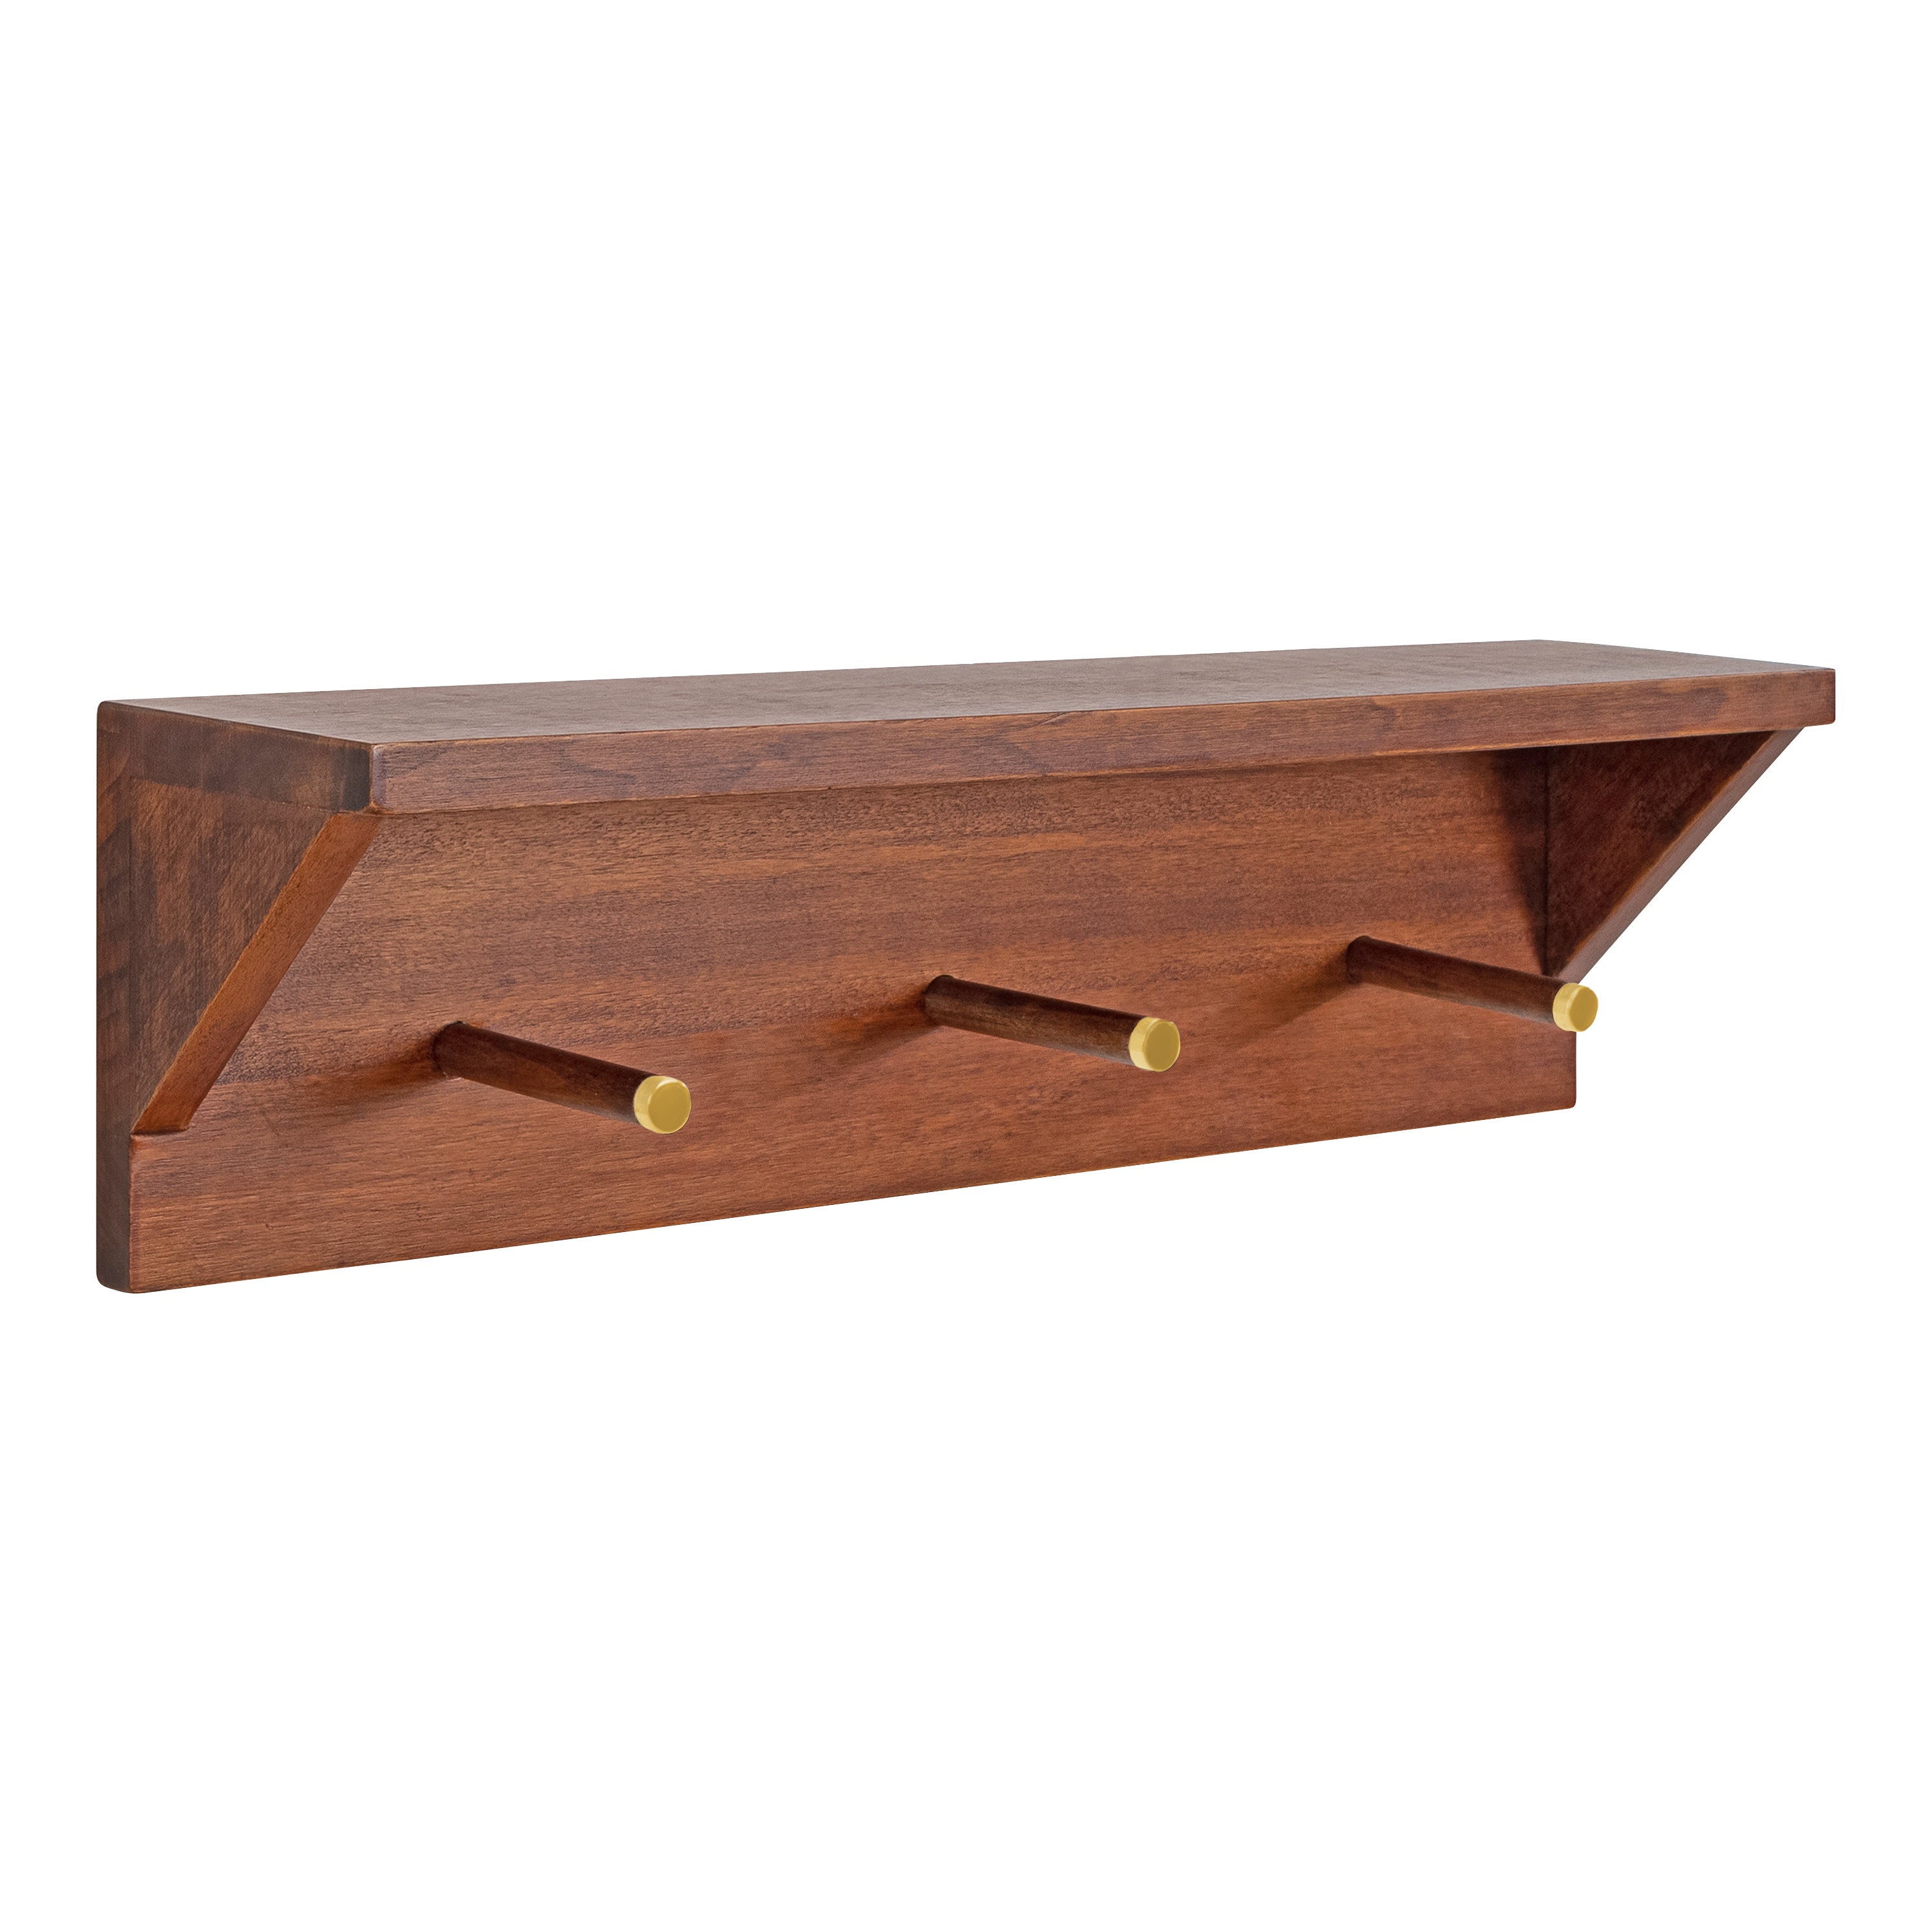 Hinter Wood Shelf with Pegs